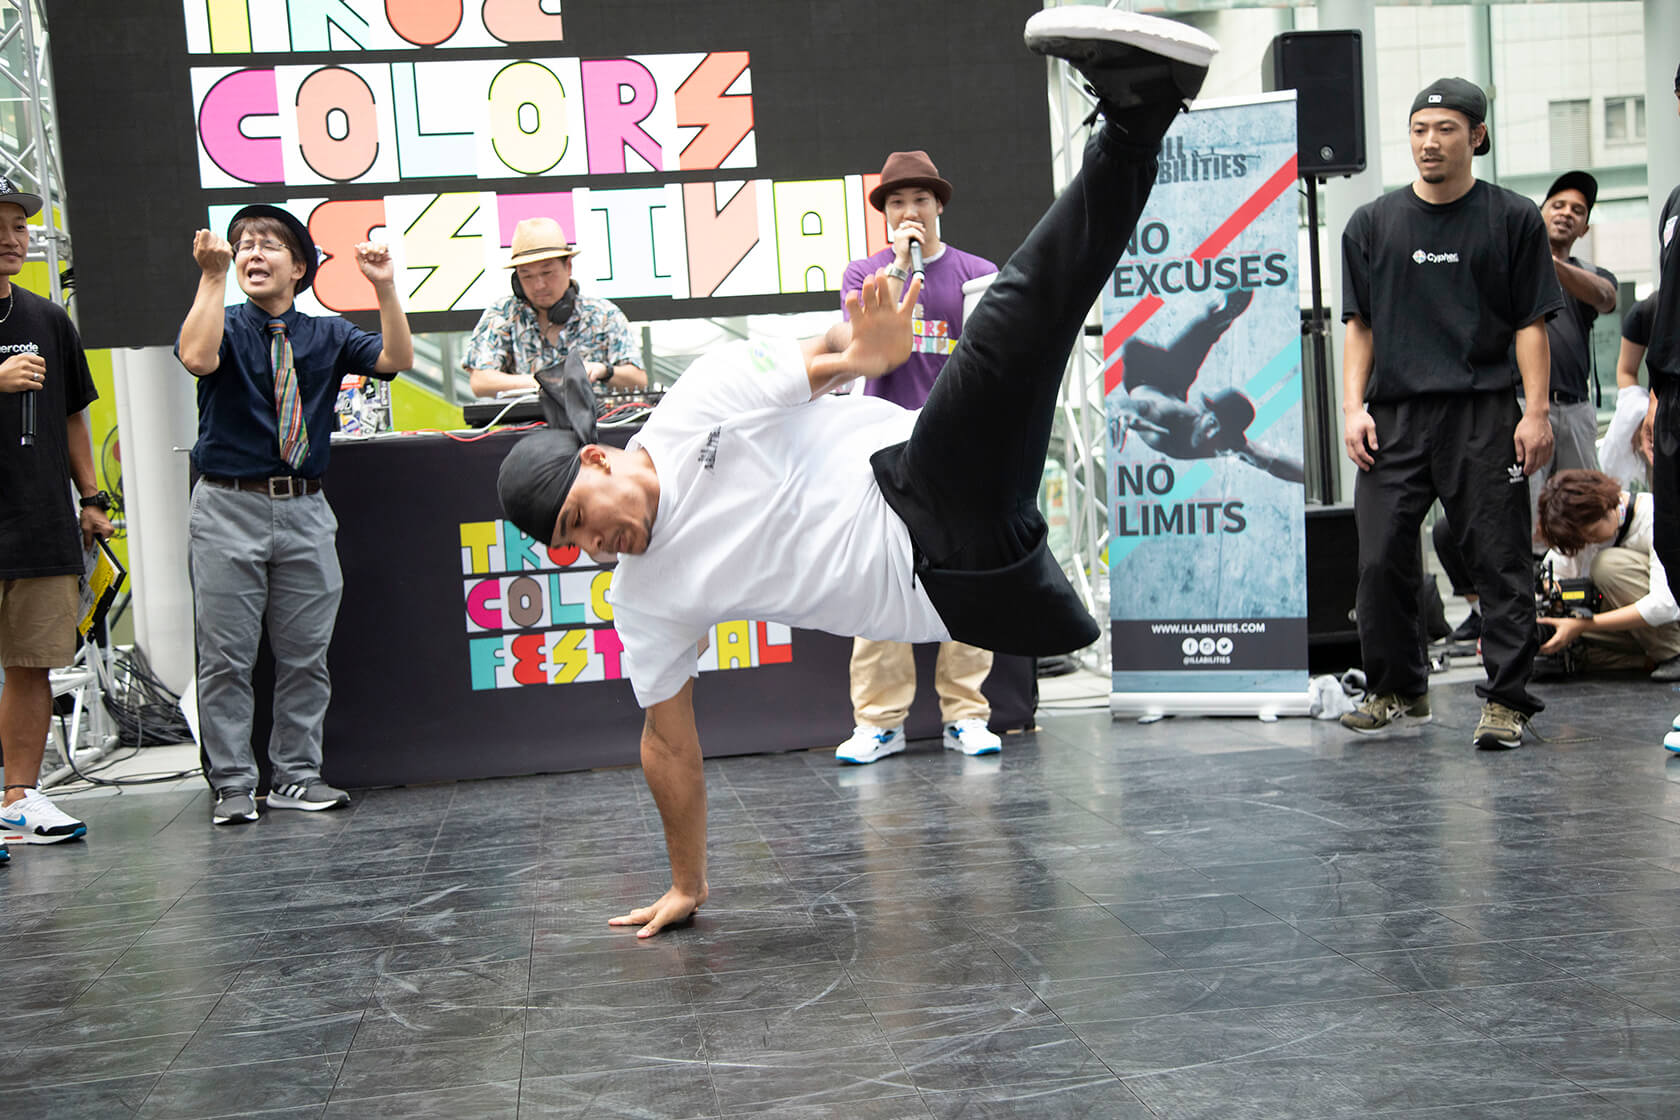 Photo of A break dancer demonstrating his skills at a True Colors DANCE event